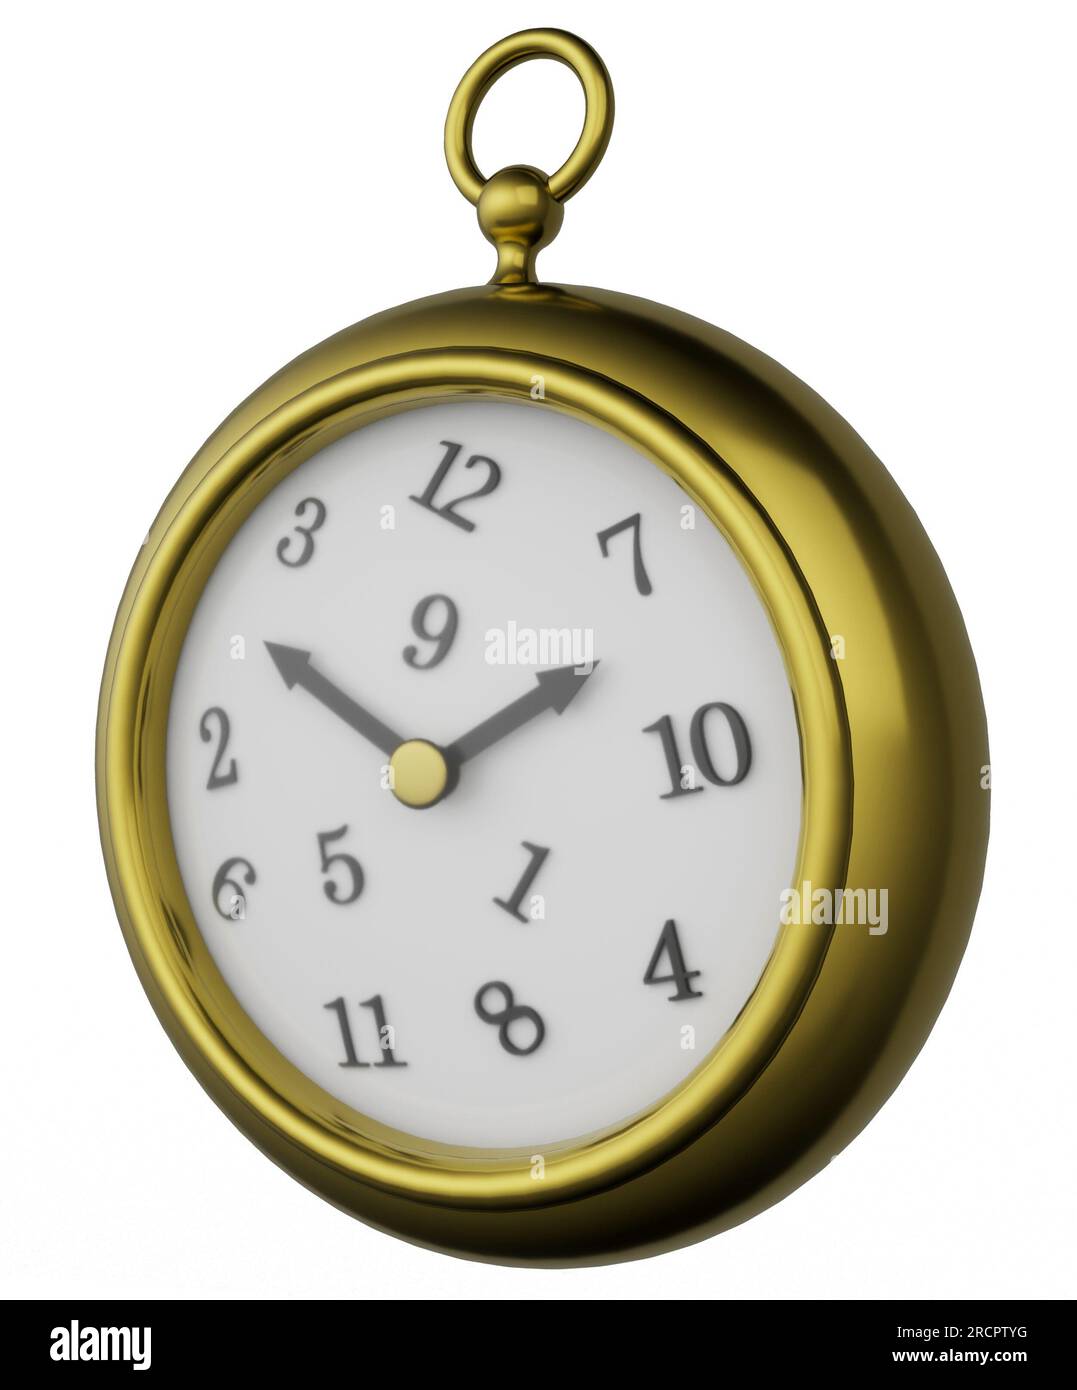 Gold pocket watch with numbers jumbled on the clock face, suggesting chaos and pandemonium, isolated on white background Stock Photo